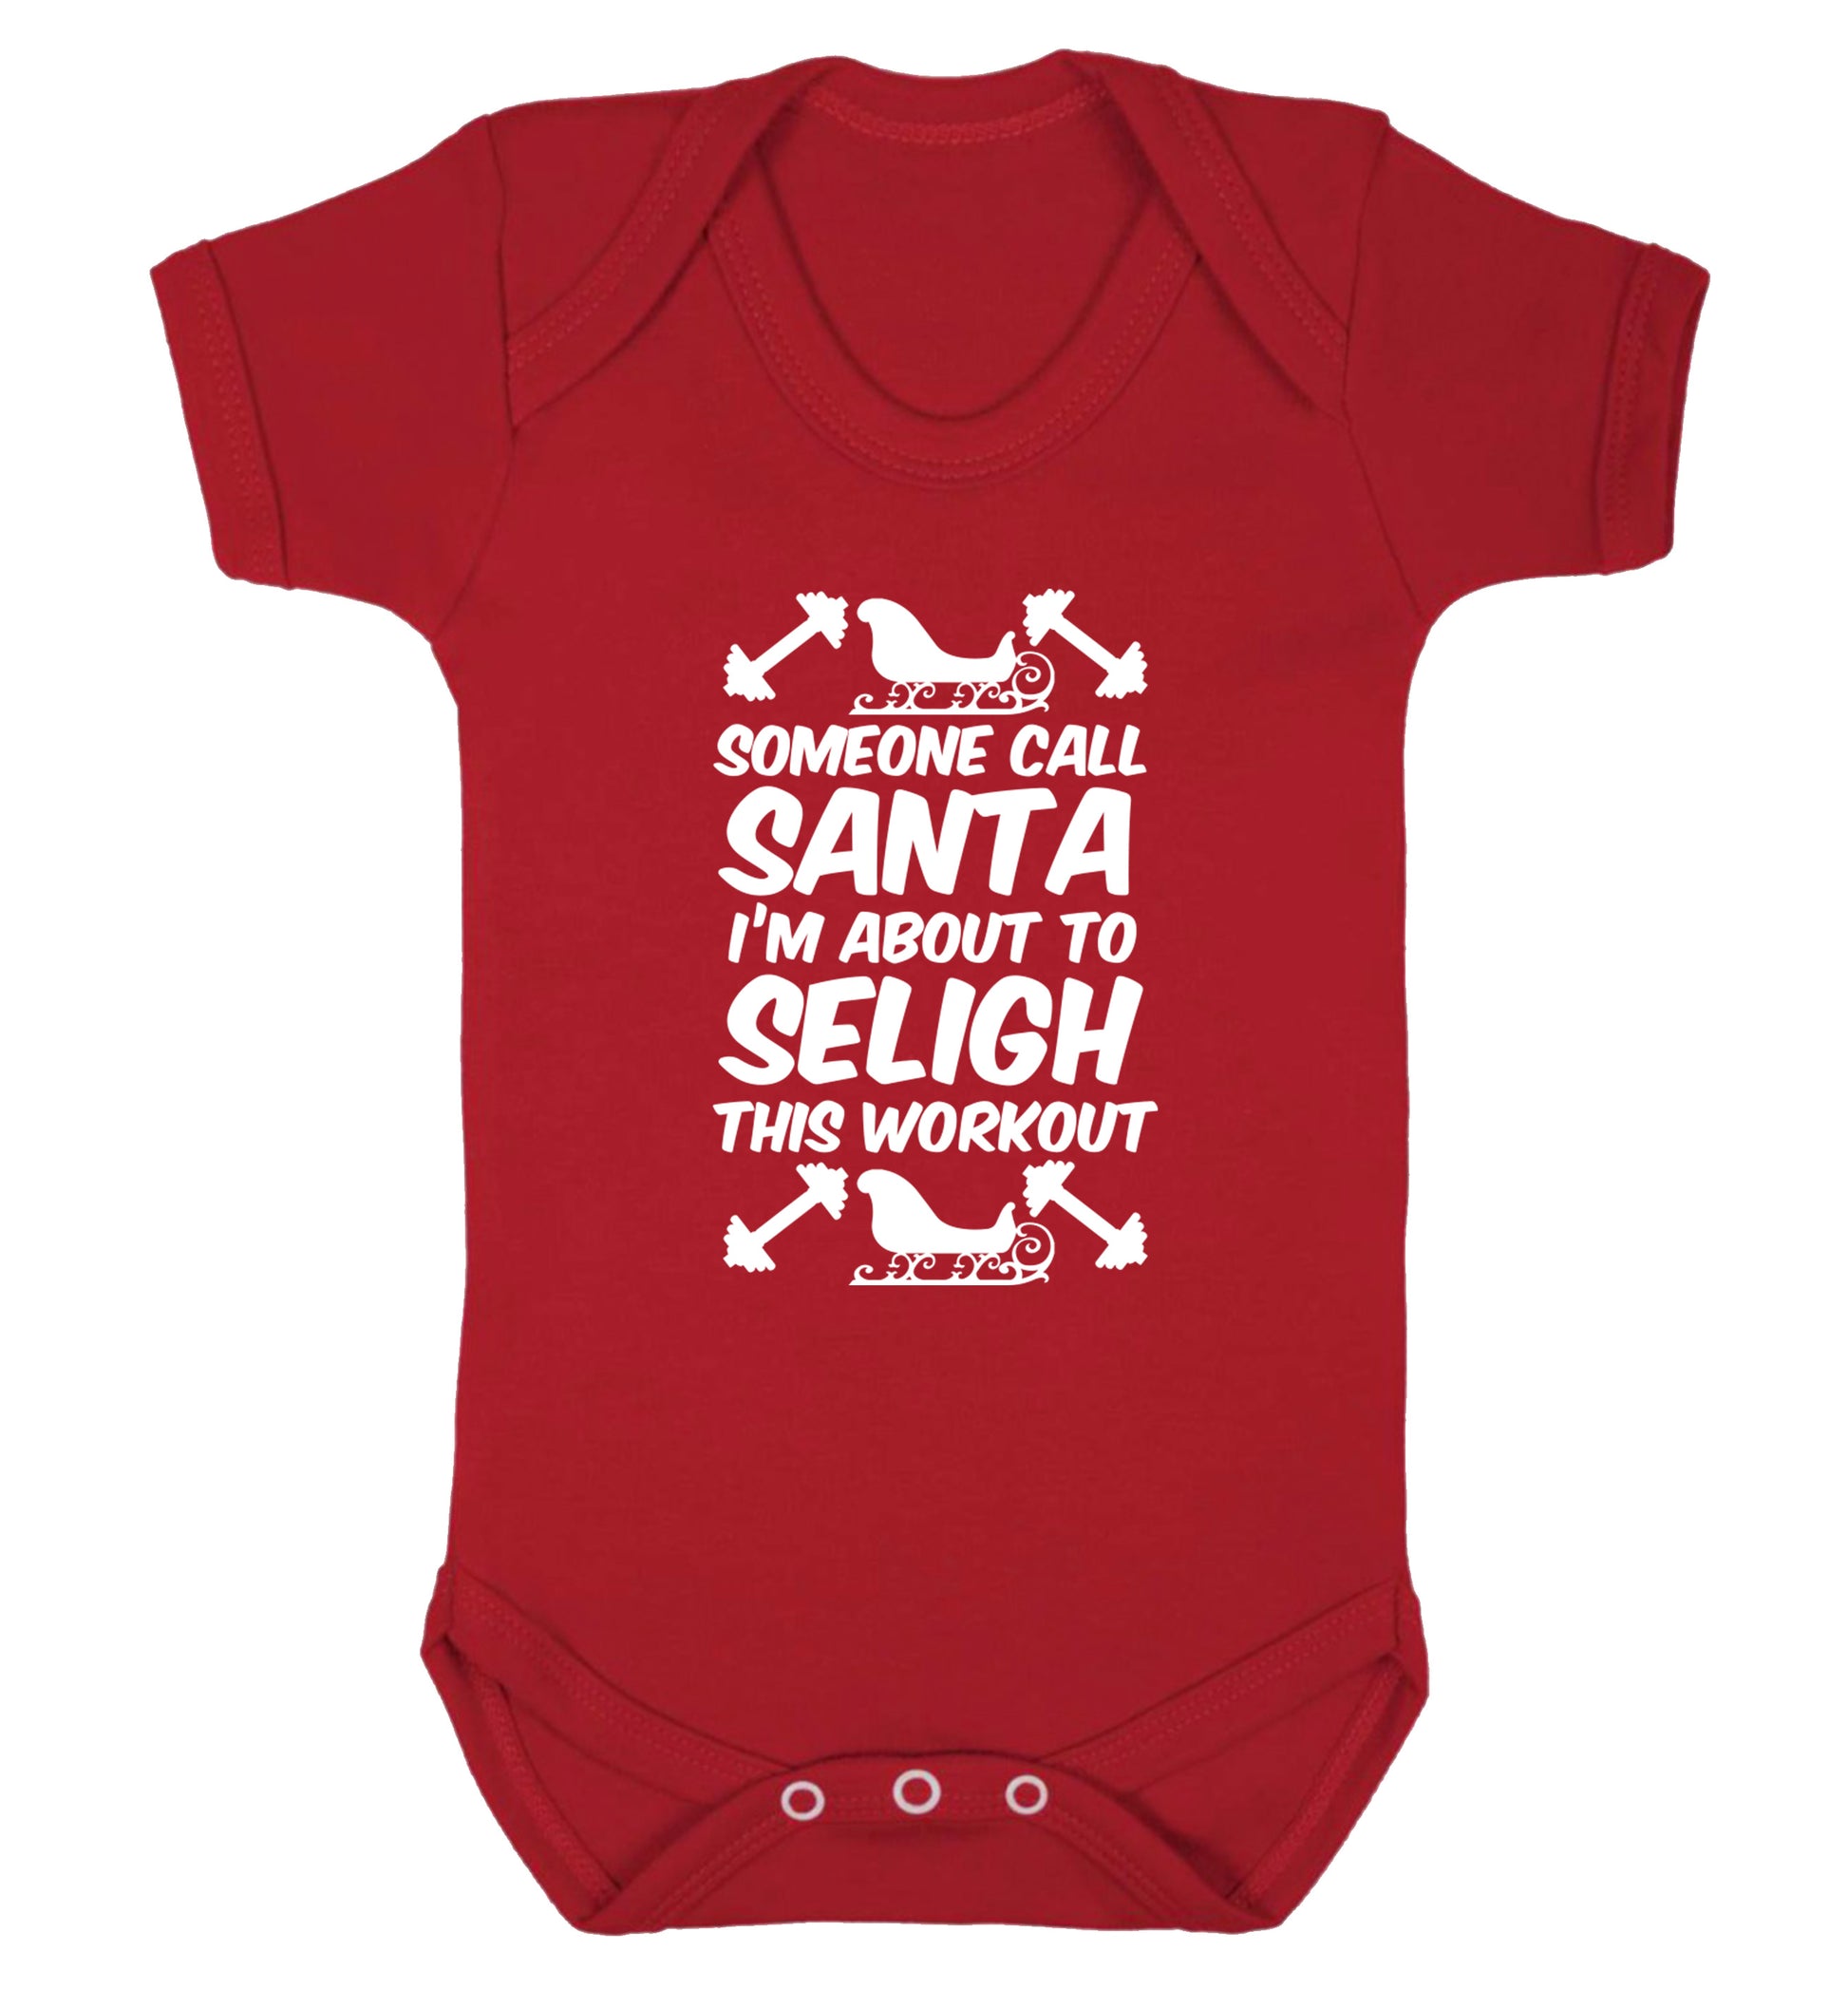 Someone call santa, I'm about to sleigh this workout Baby Vest red 18-24 months